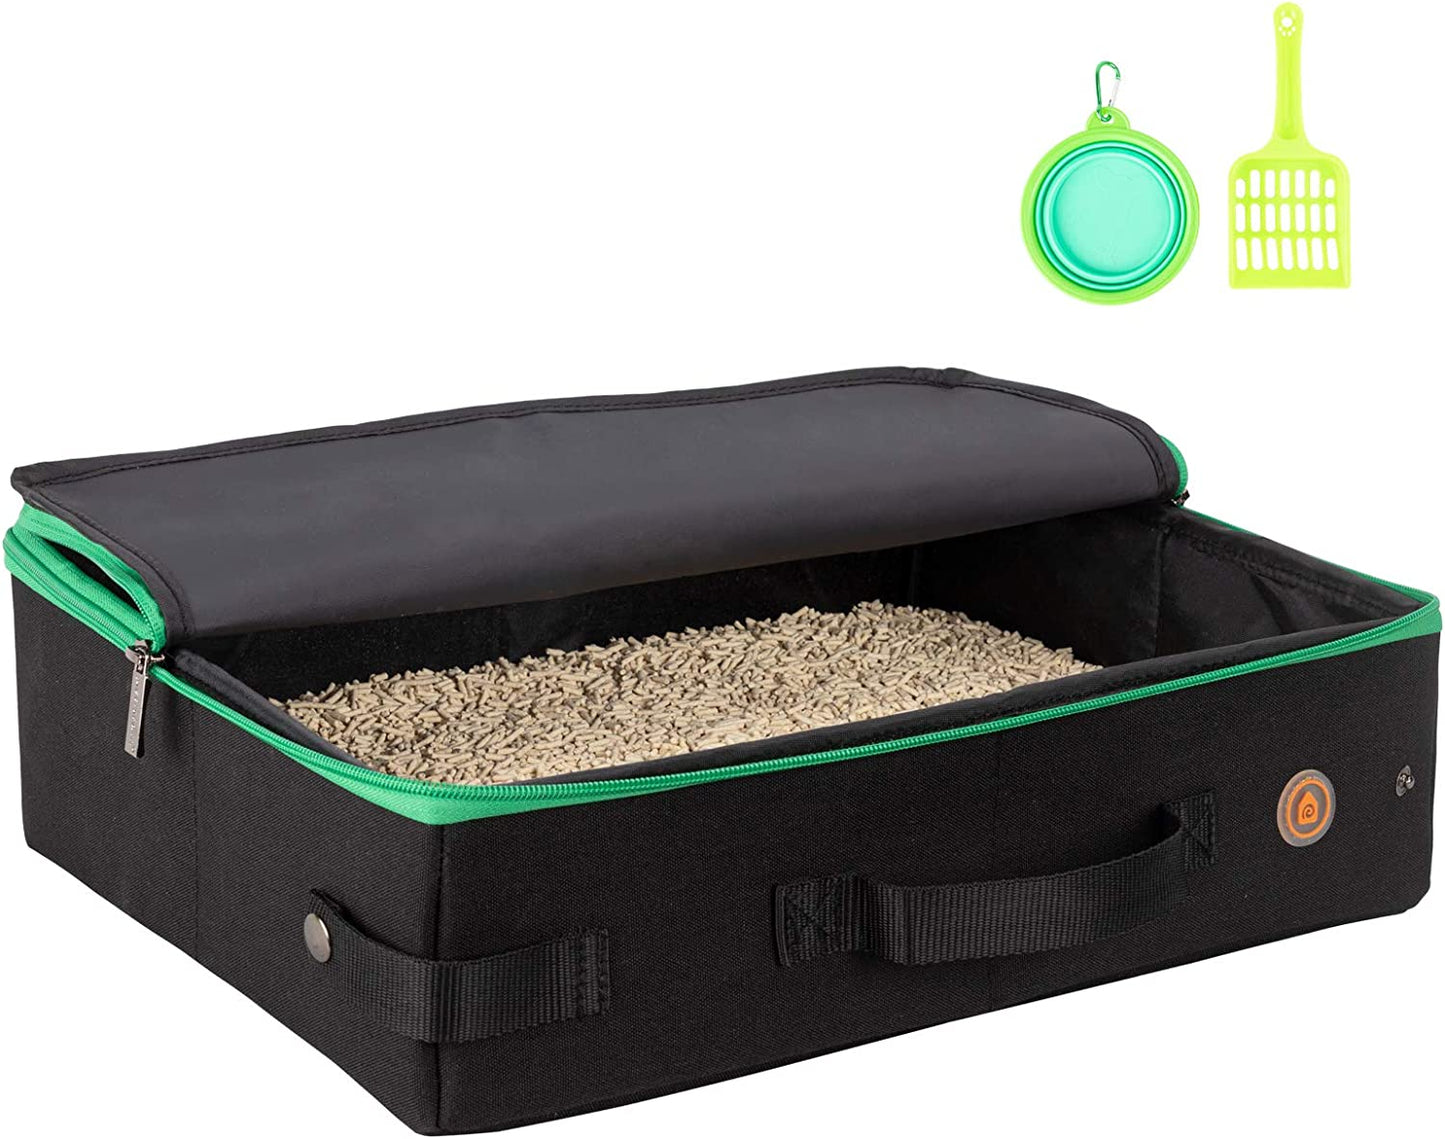 Portable Cat Travel Litter Box with Zipped Lid, Medium, No Leakage, No Smell, Easy to Carry, Easy to Use in Hotels, Car, Black